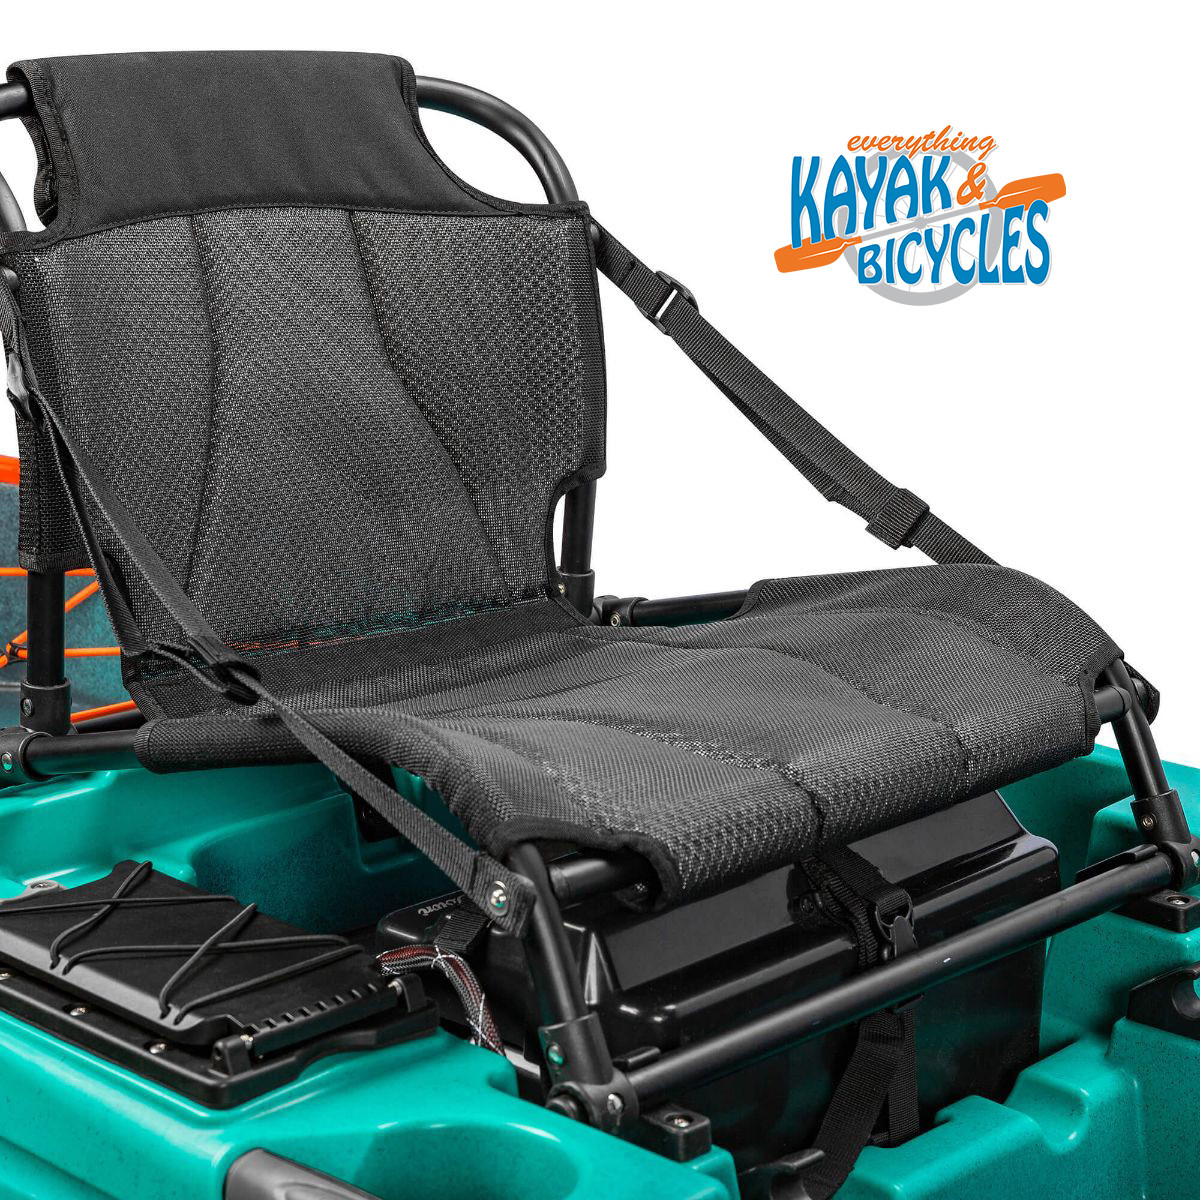 Premium seating for all day comfort. Dual-layer Textilene is durable, UV resistant and easy to clean. A mid-layer of 3D mesh adds comfort without inhibiting Textilene's natural breathability. Position seat high or low in the kayak. Removable for transport